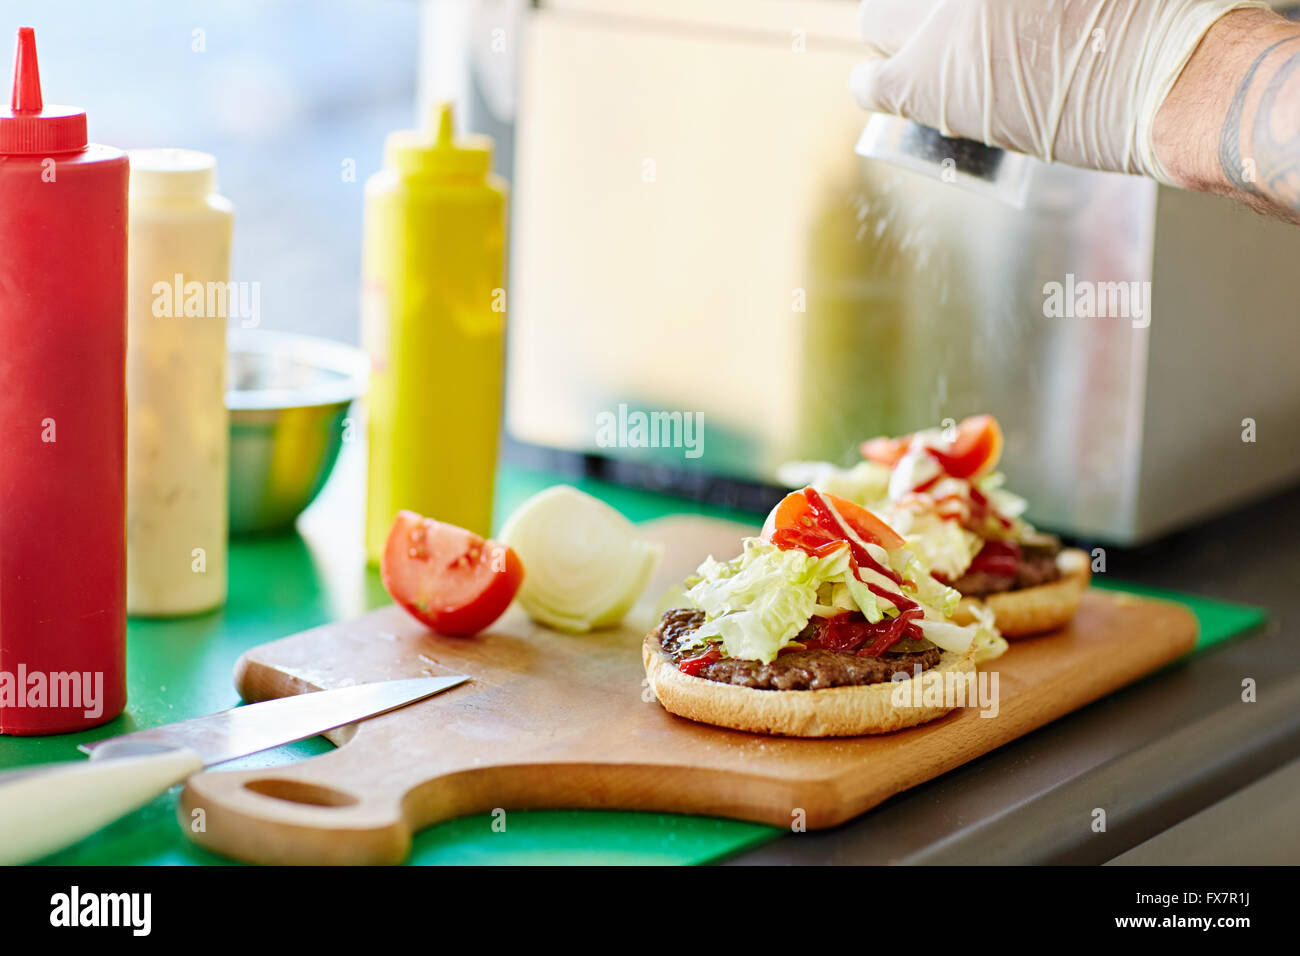 Freshly made open takeaway burger on a wooden board Stock Photo